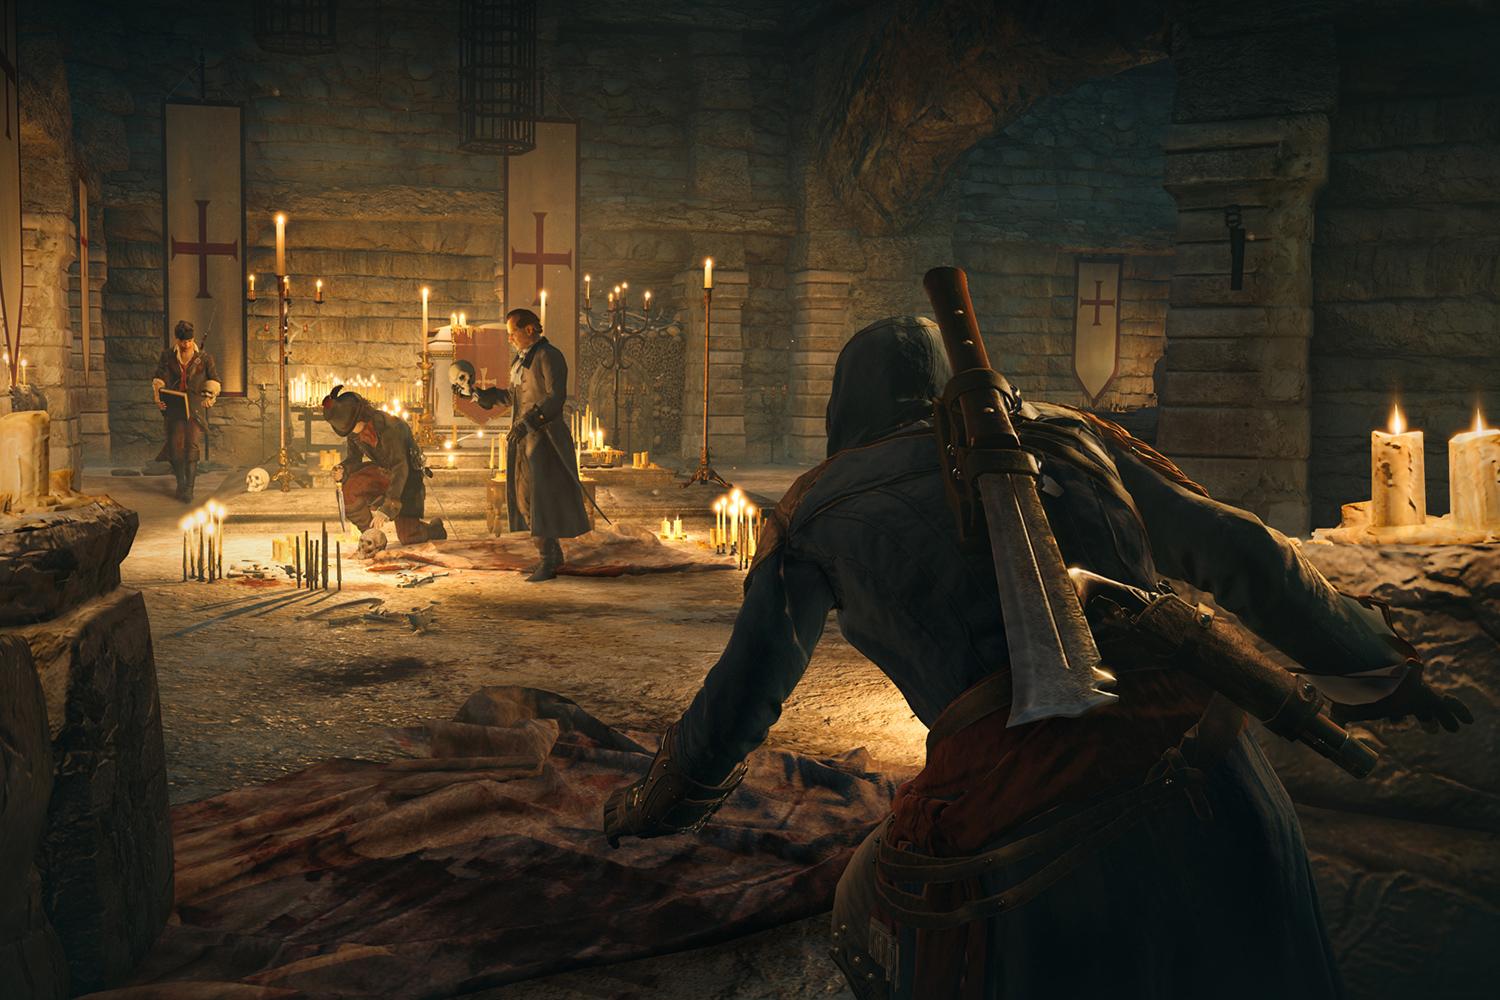 Assassin's Creed: Unity confirmed for PC, PS4 and Xbox One, Games